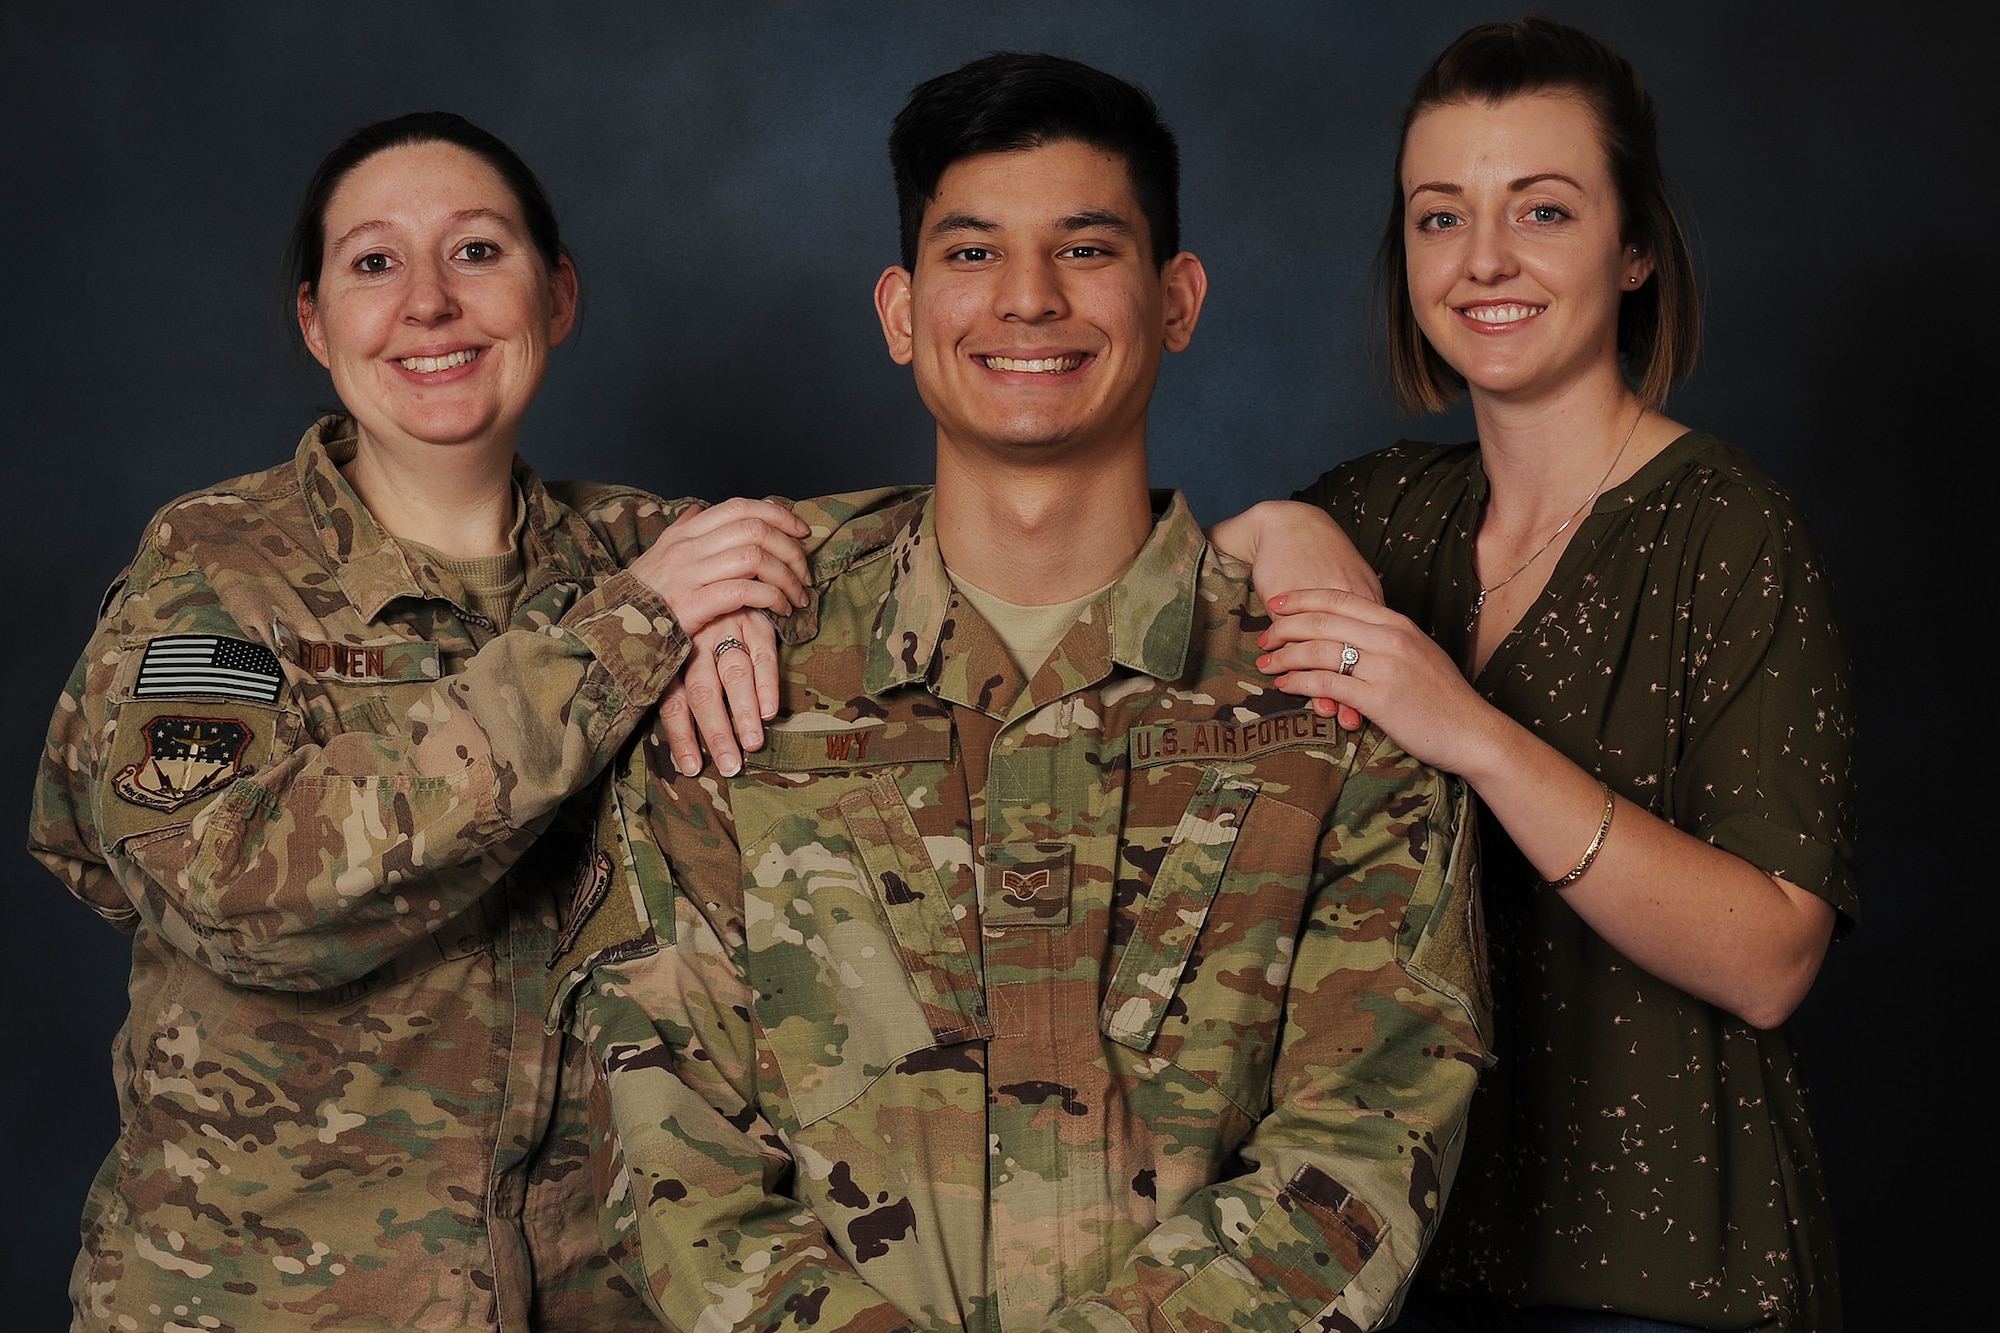 Senior Airman Christopher Wy, 341st Security Forces Support Squadron convoy response force lead, center, poses for a photo with Staff Sgt. Elizabeth Bowen, 341st SSPTS CRF team leader, left, and Senior Airman Cassi Dornon, 341st SSPTS CRF team member Jan. 16, 2019, at Malmstrom Air Force Base, Mont. Dornon and Bowen helped their wingman with a tough life situation.